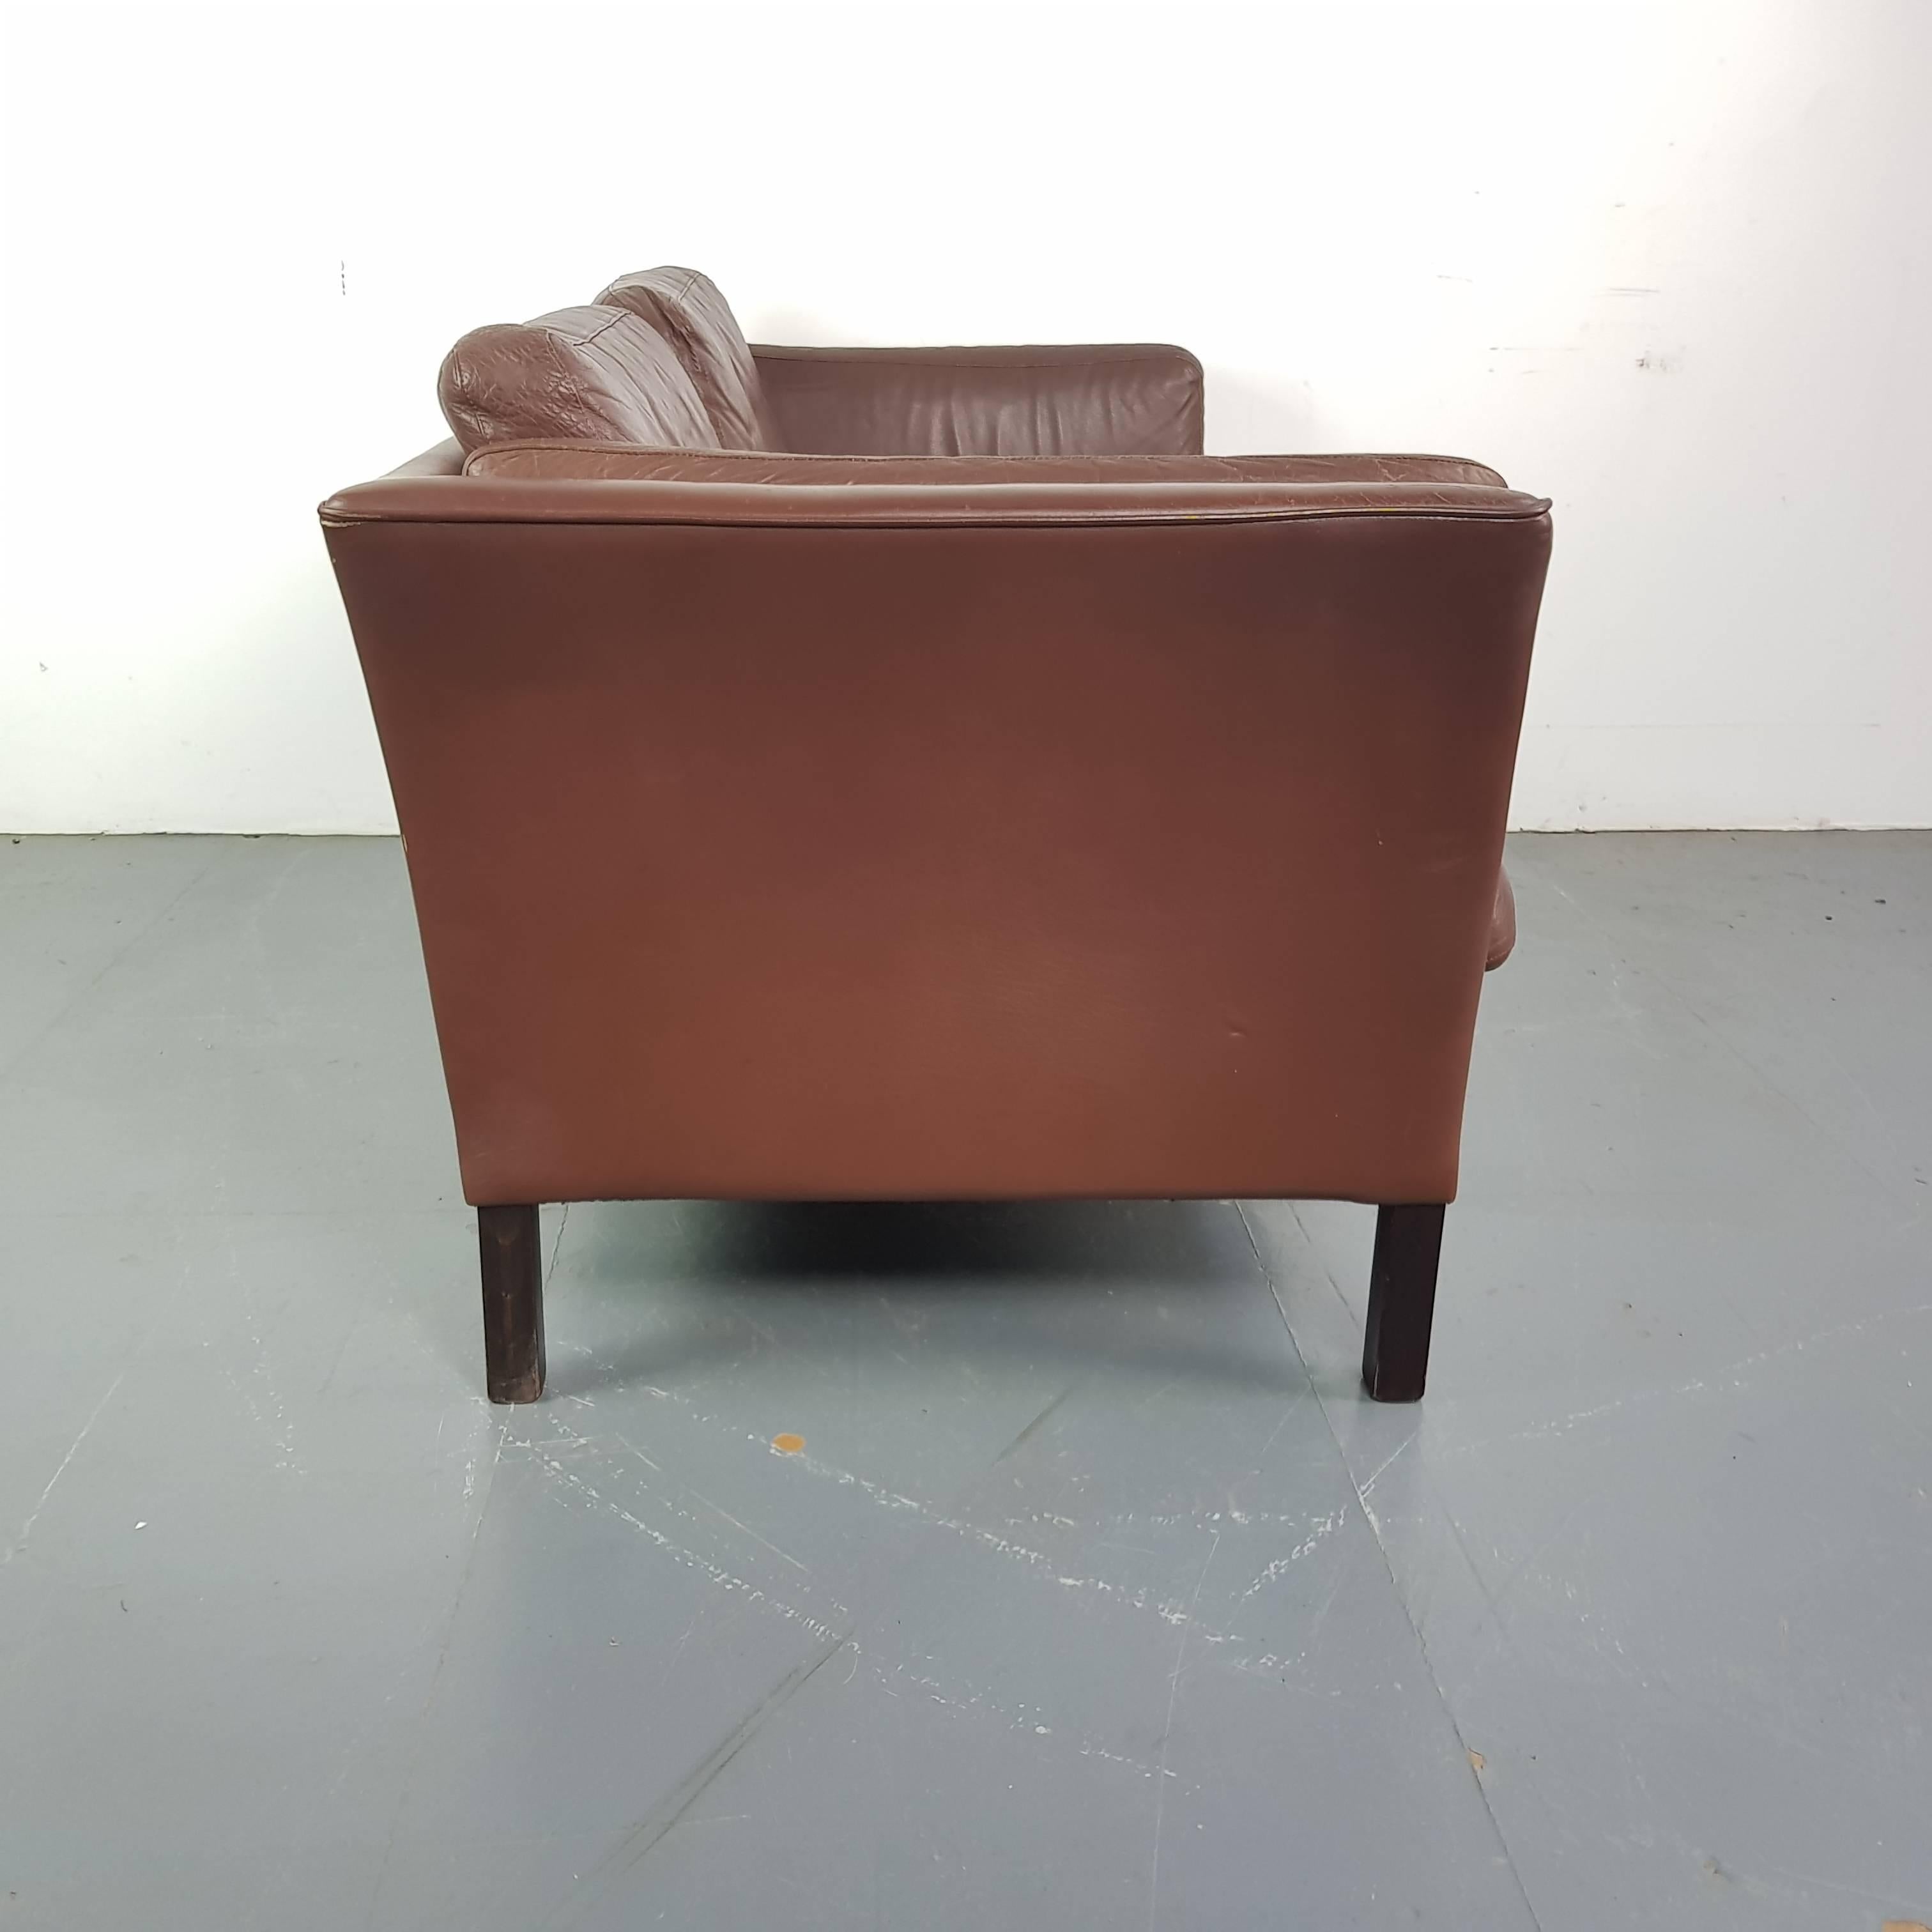 1970s Chestnut Brown Leather Mogensen Style Two-Seat Sofa For Sale 1